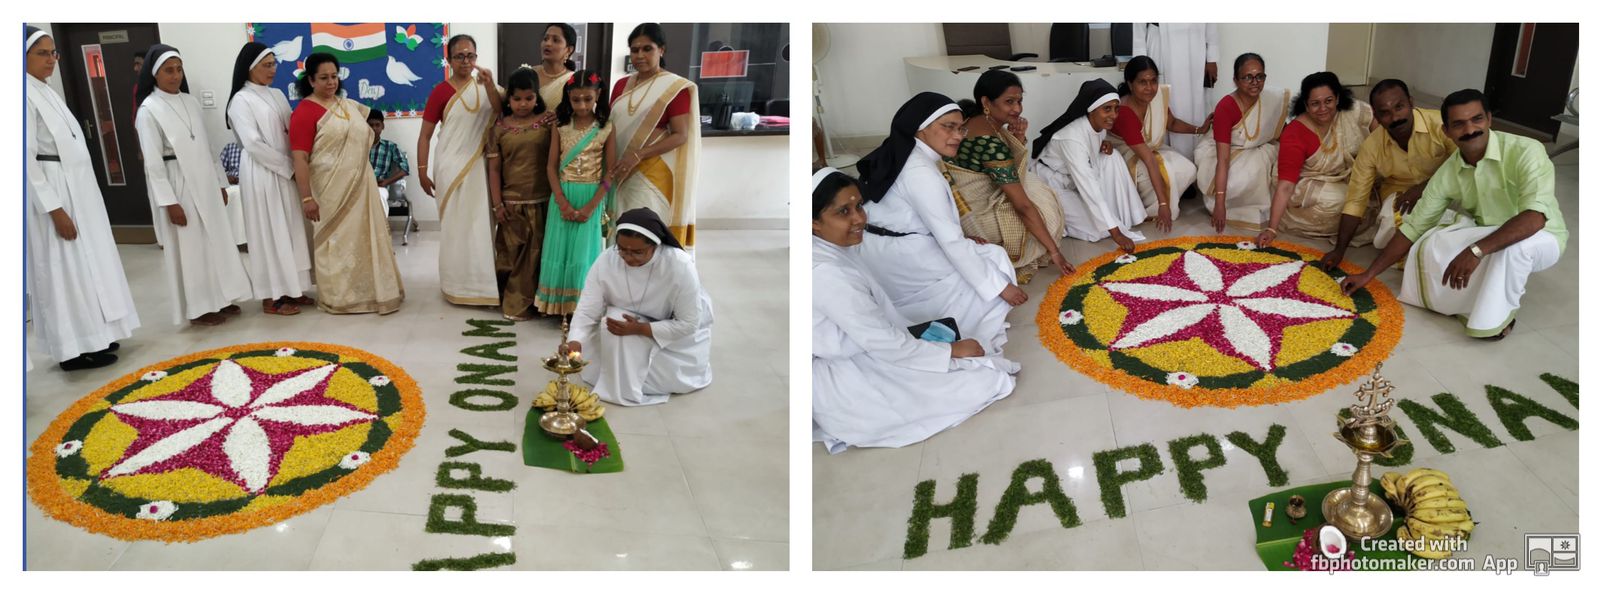 ONAM & MOTHER'S FEAST DAY CELEBRATIONS